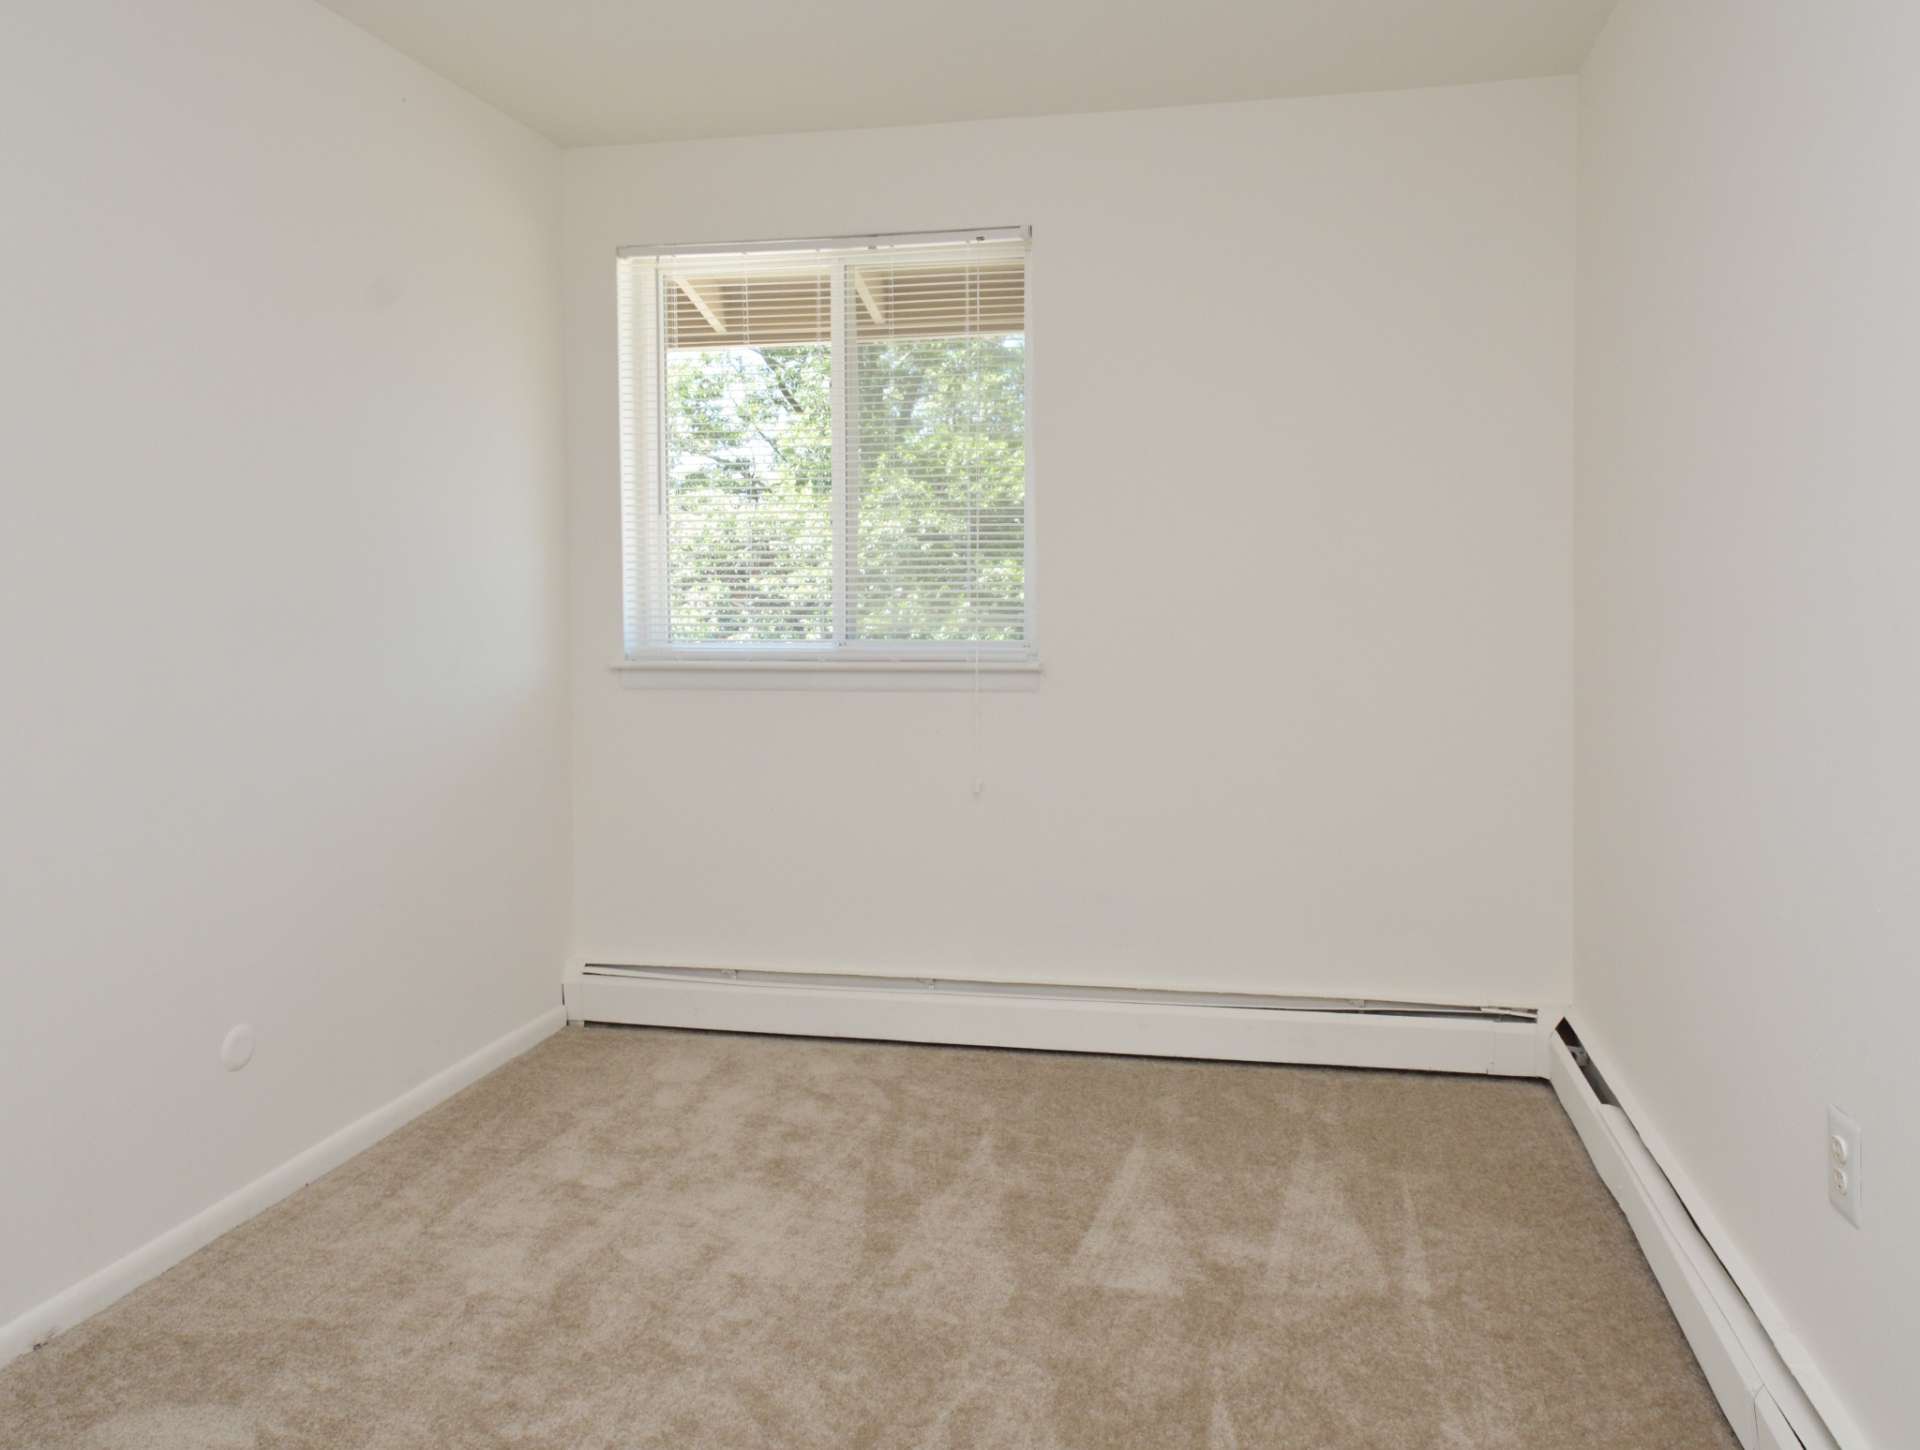 Bedroom with white walls, a window, and beige carpets.